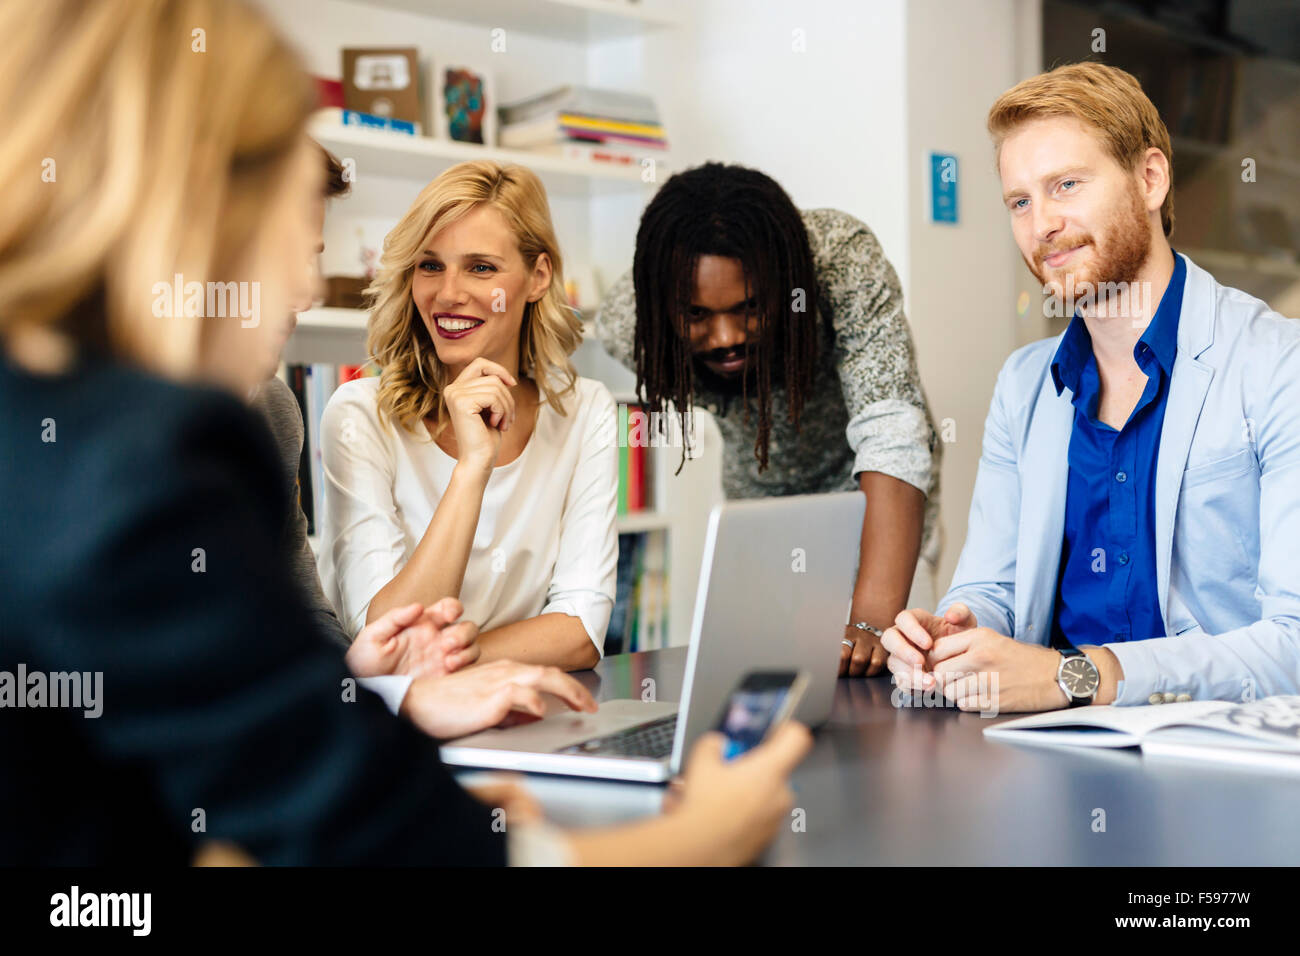 Team of skilled designers and business people working together on a project Stock Photo